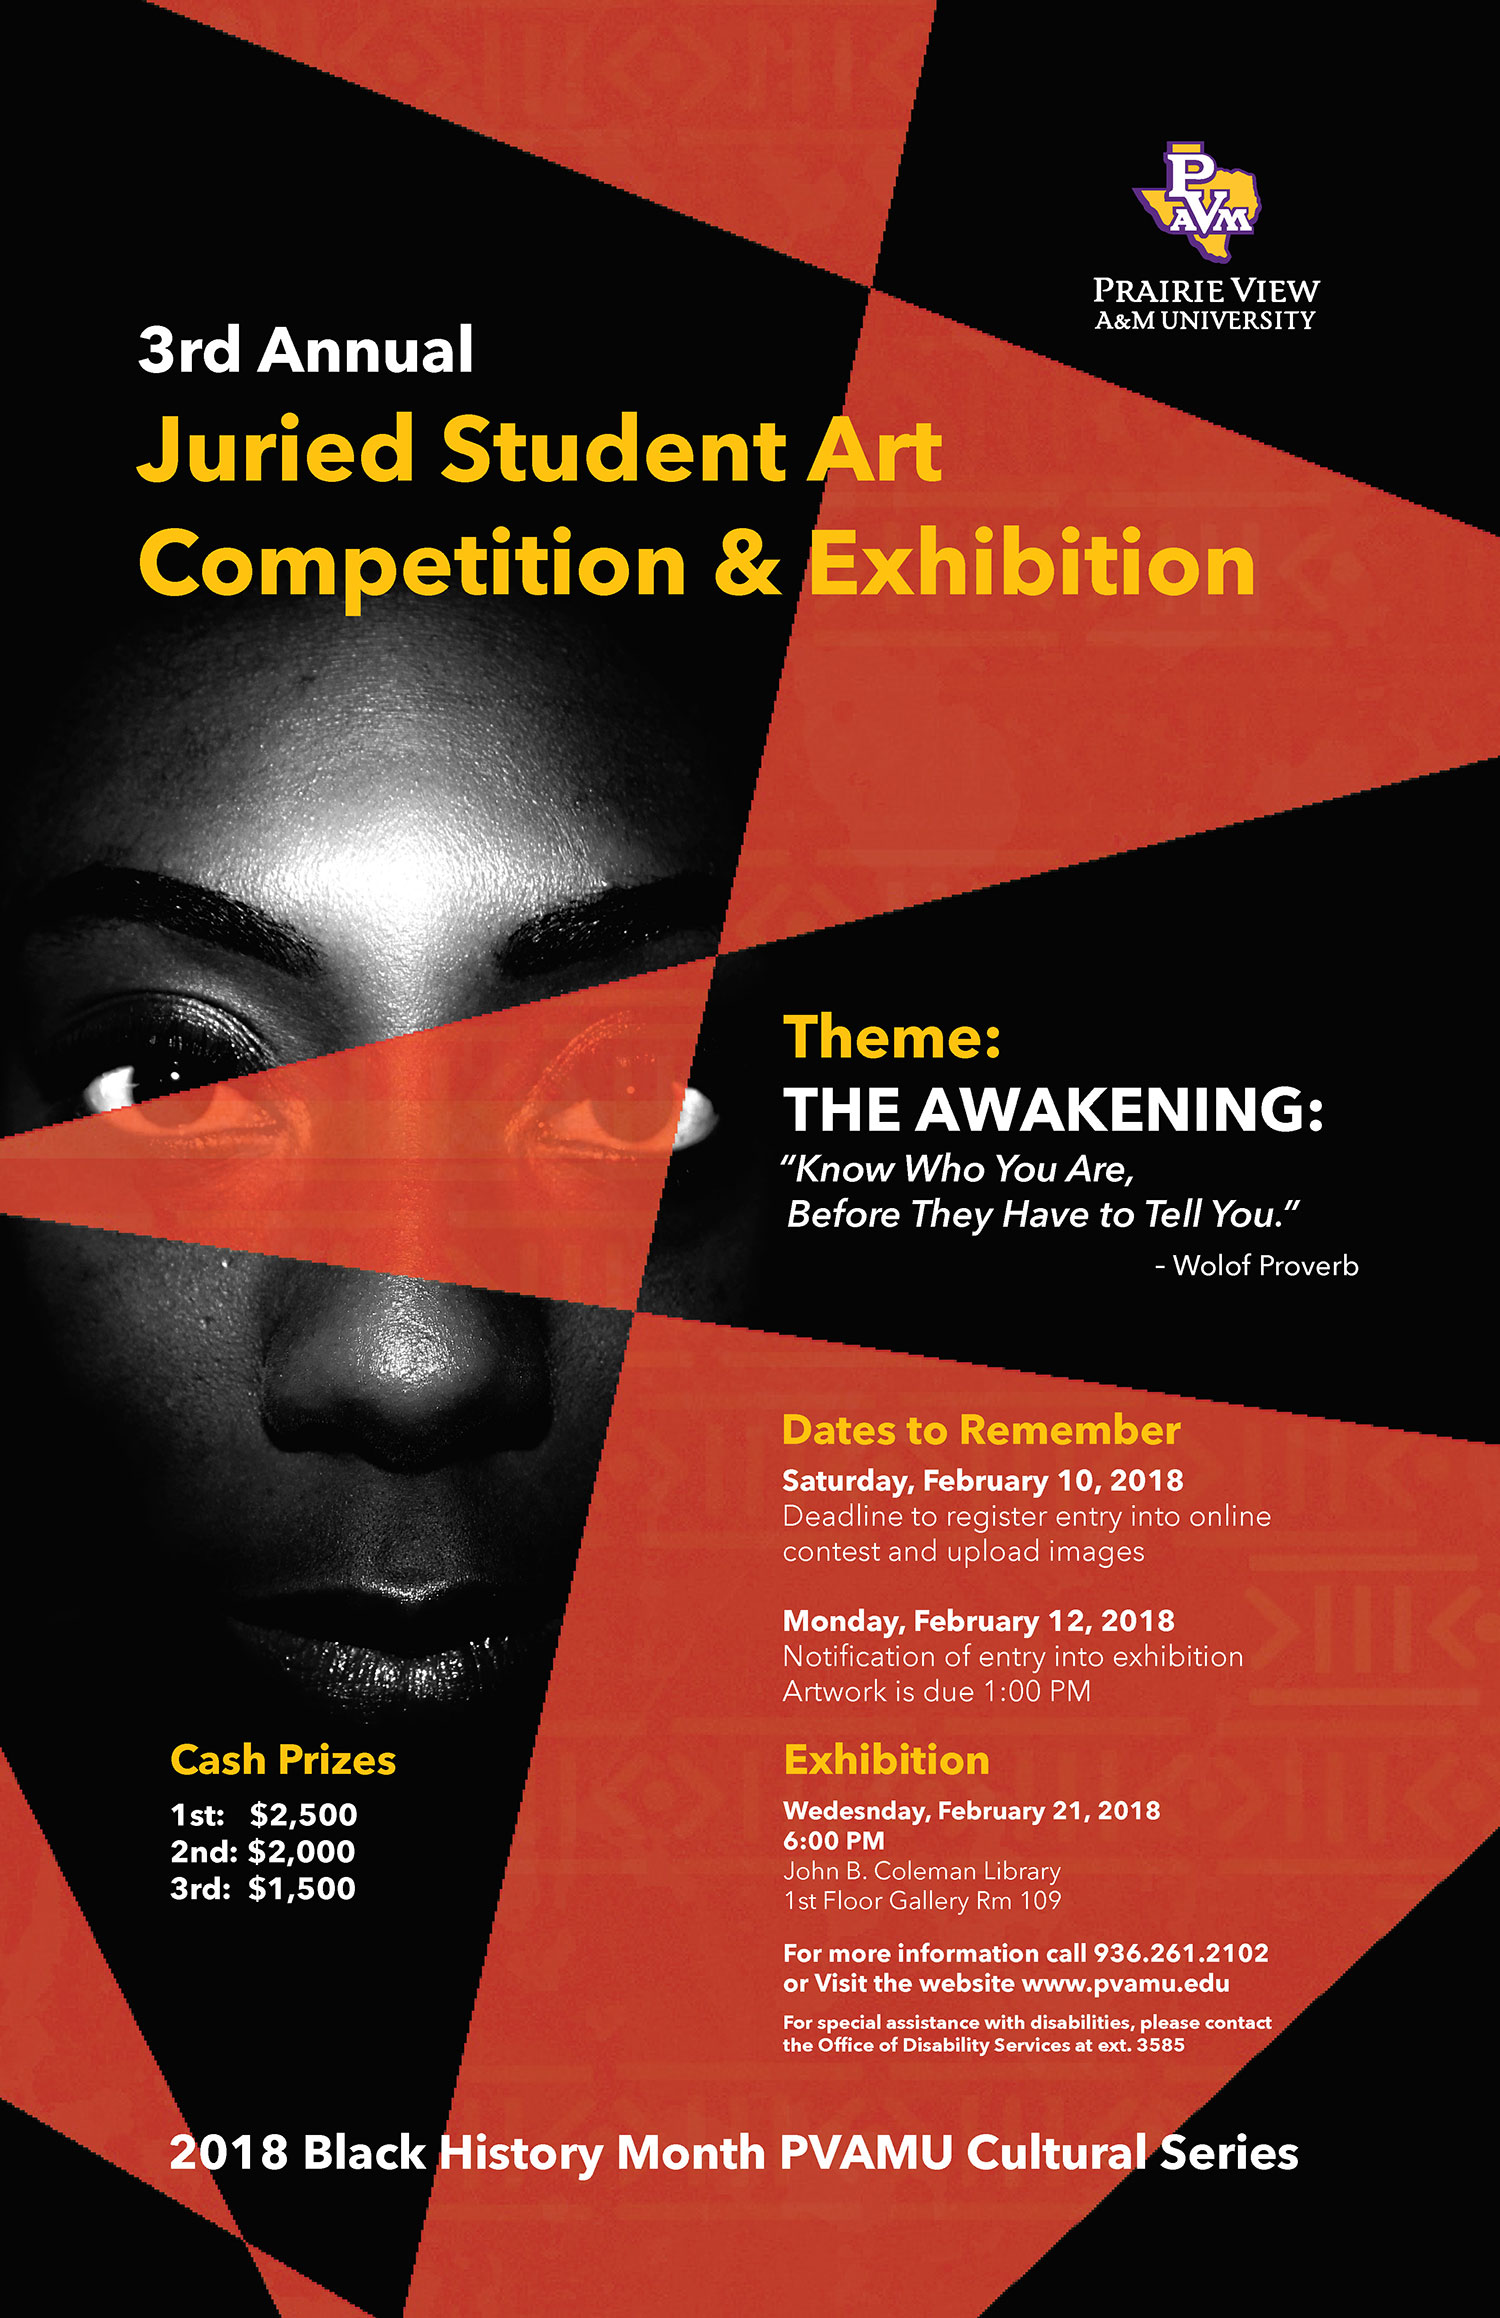 The 3rd Annual Student Art Exhibition poster in red